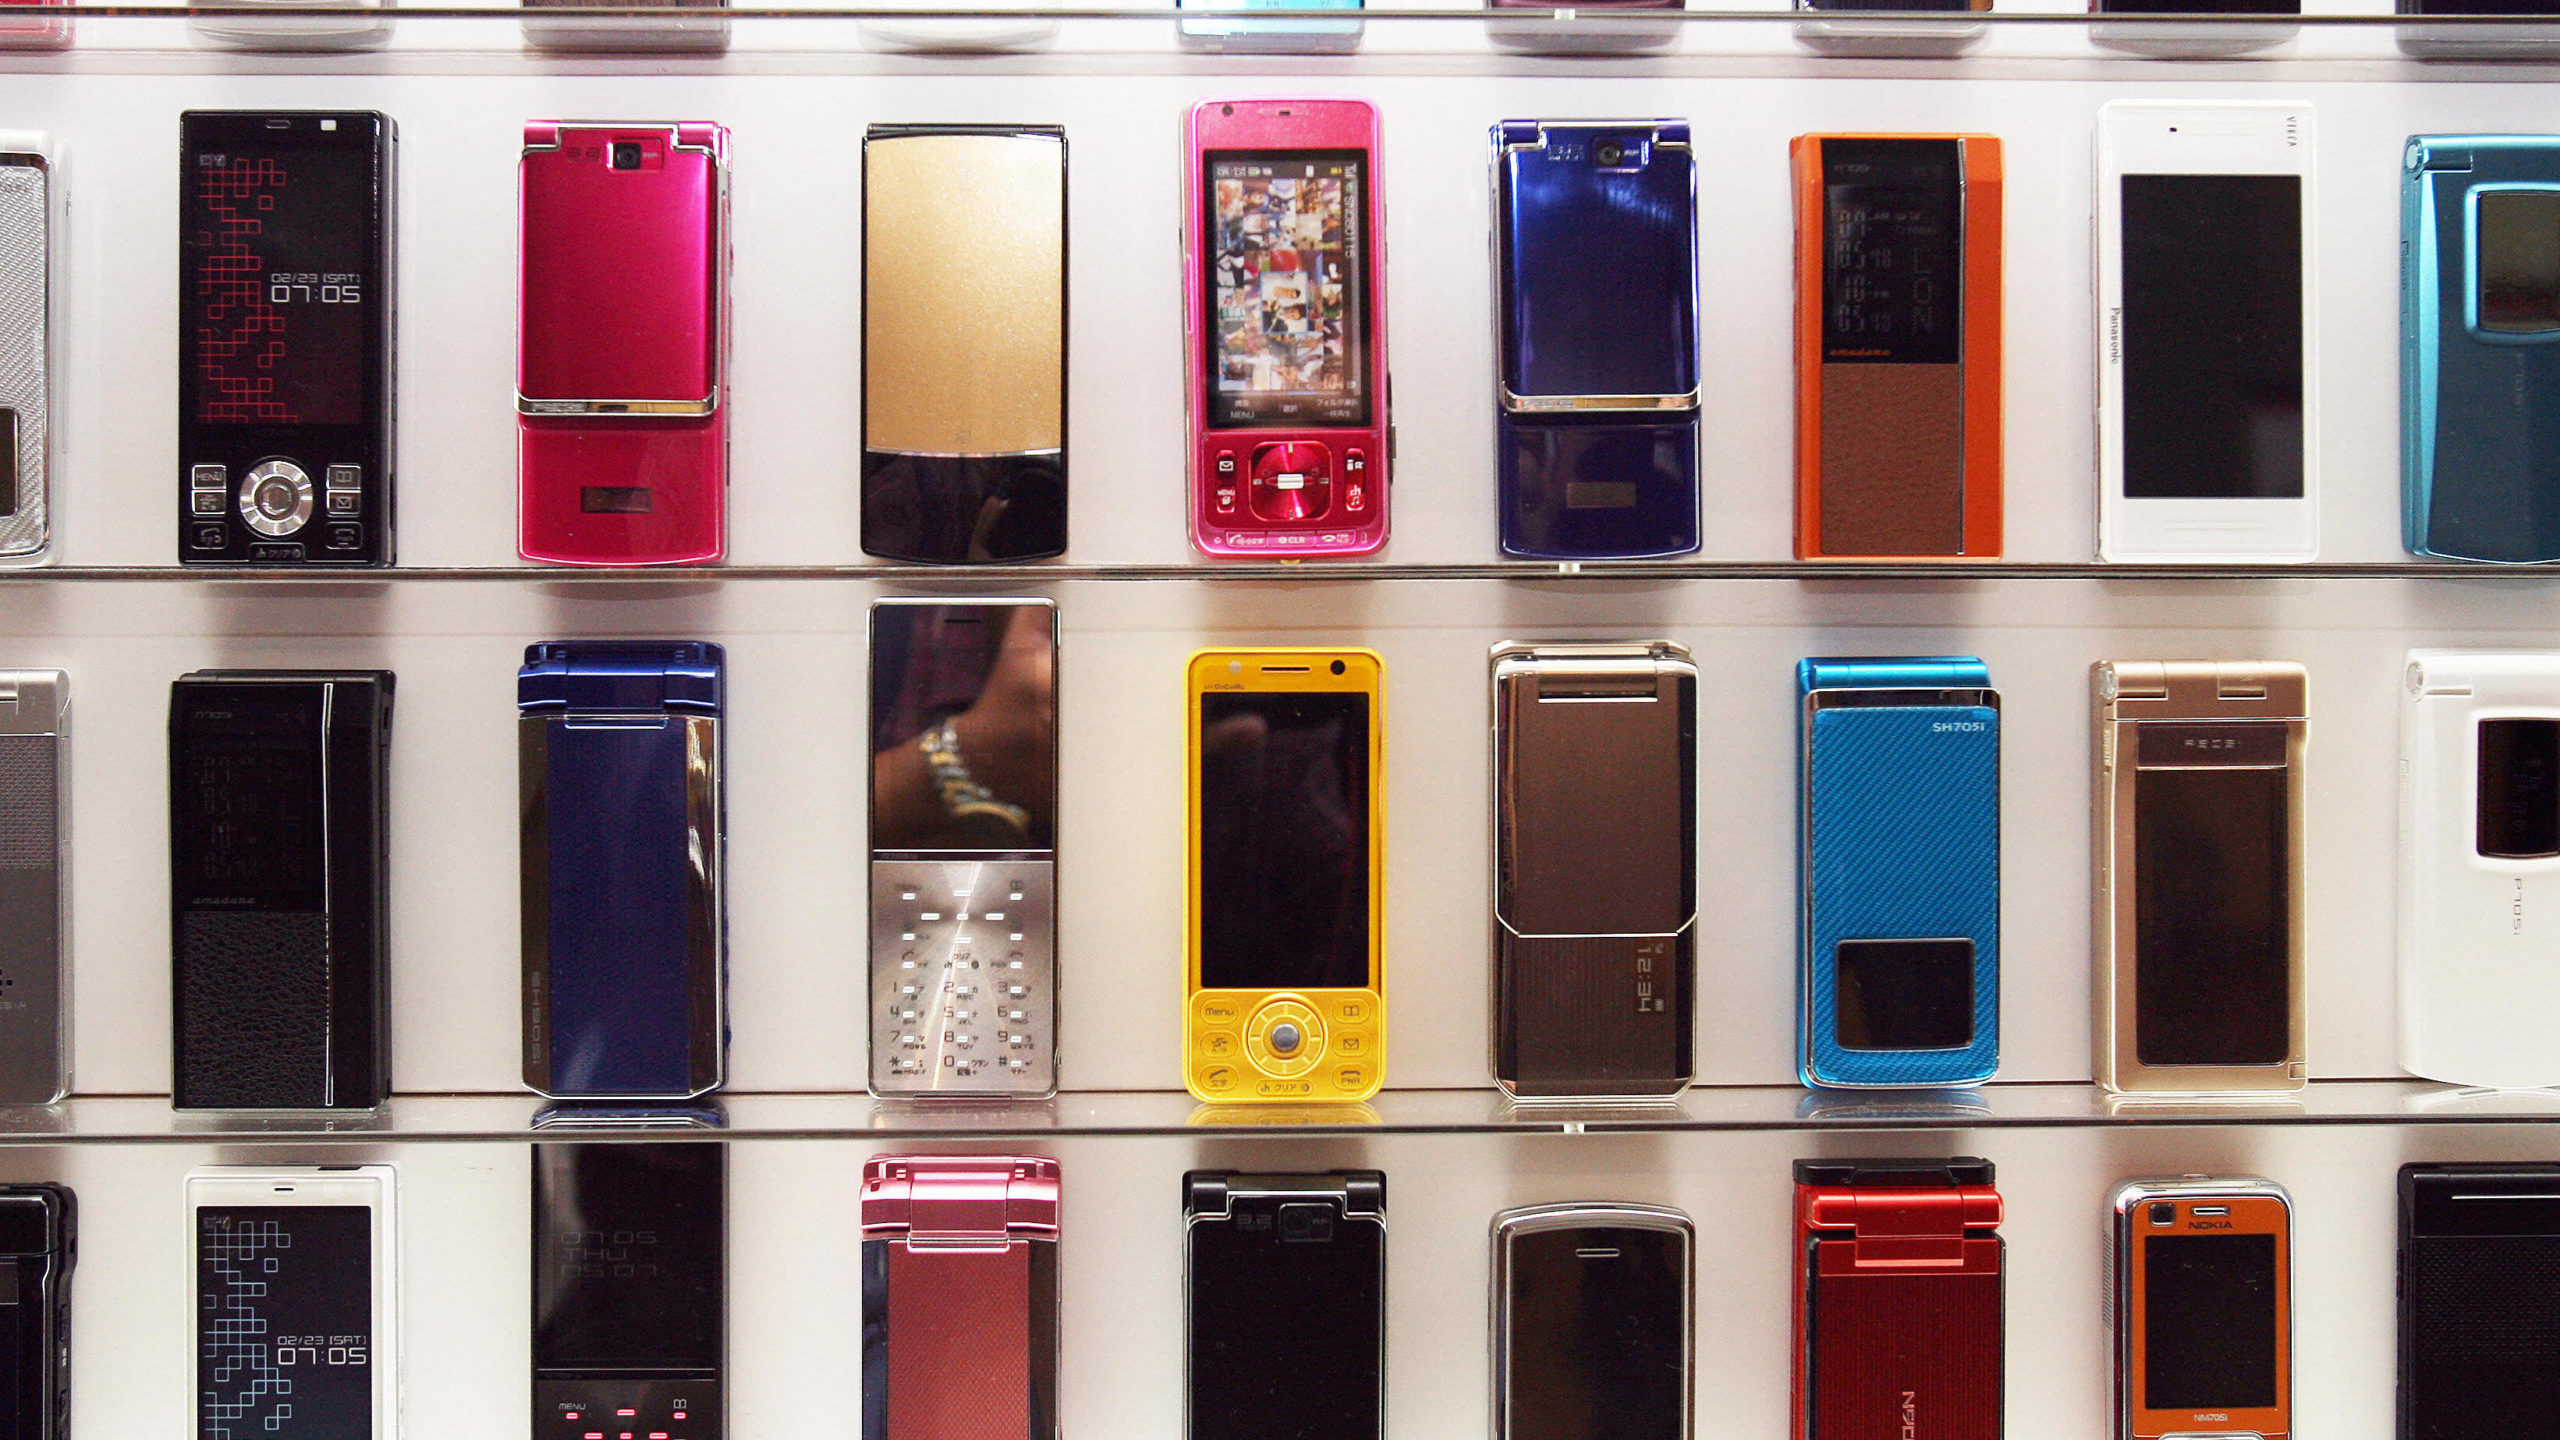 A lineup of NTT DoCoMo phones from 2007. (Photo: Getty)